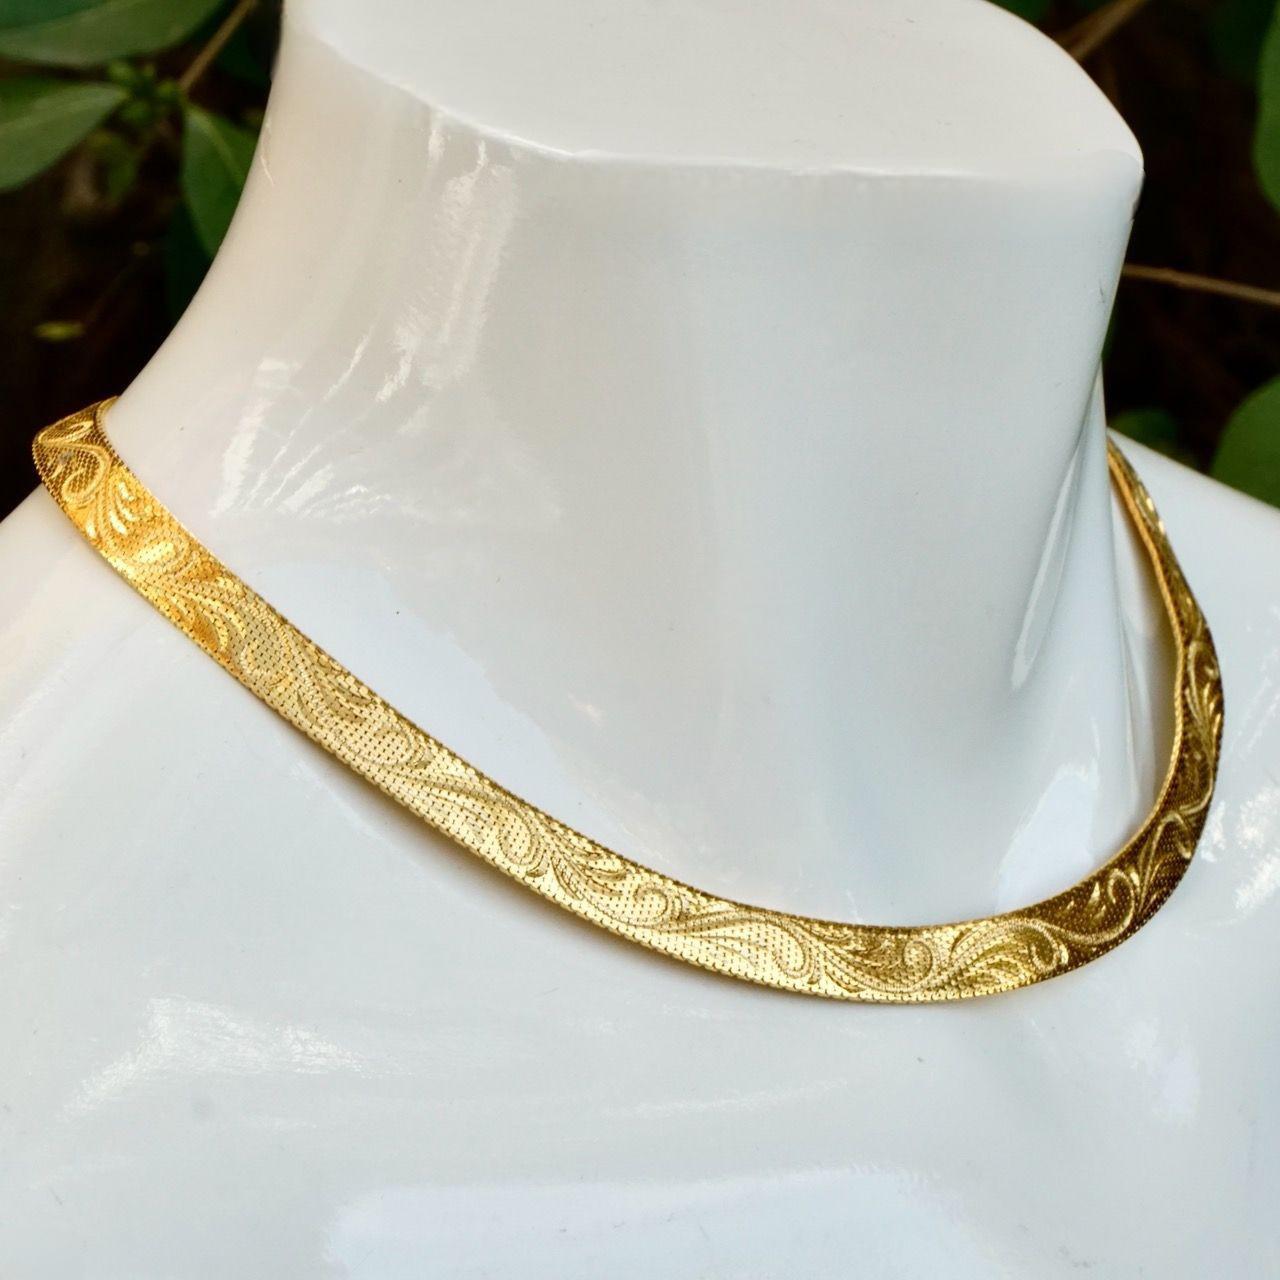 Gold Plated Swirl Design Egyptian Revival Mesh Collar Necklace circa 1980s For Sale 2